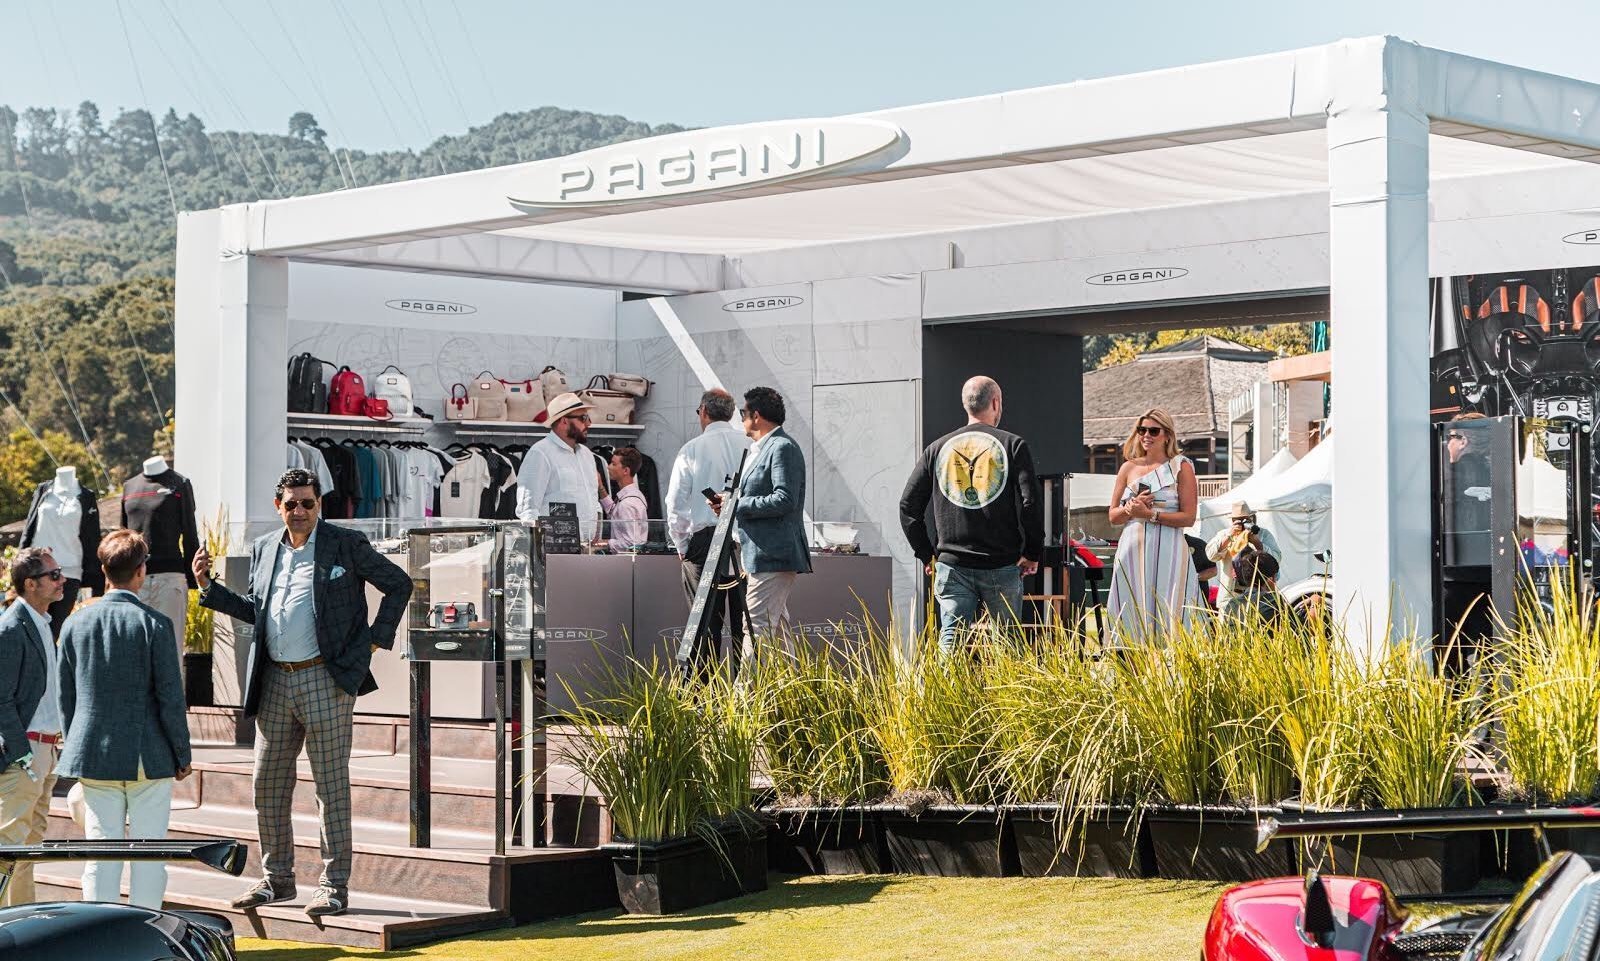 Pagani at the Monterey Car Week: The new Huayra Roadster BC and the store dedicated to clothing